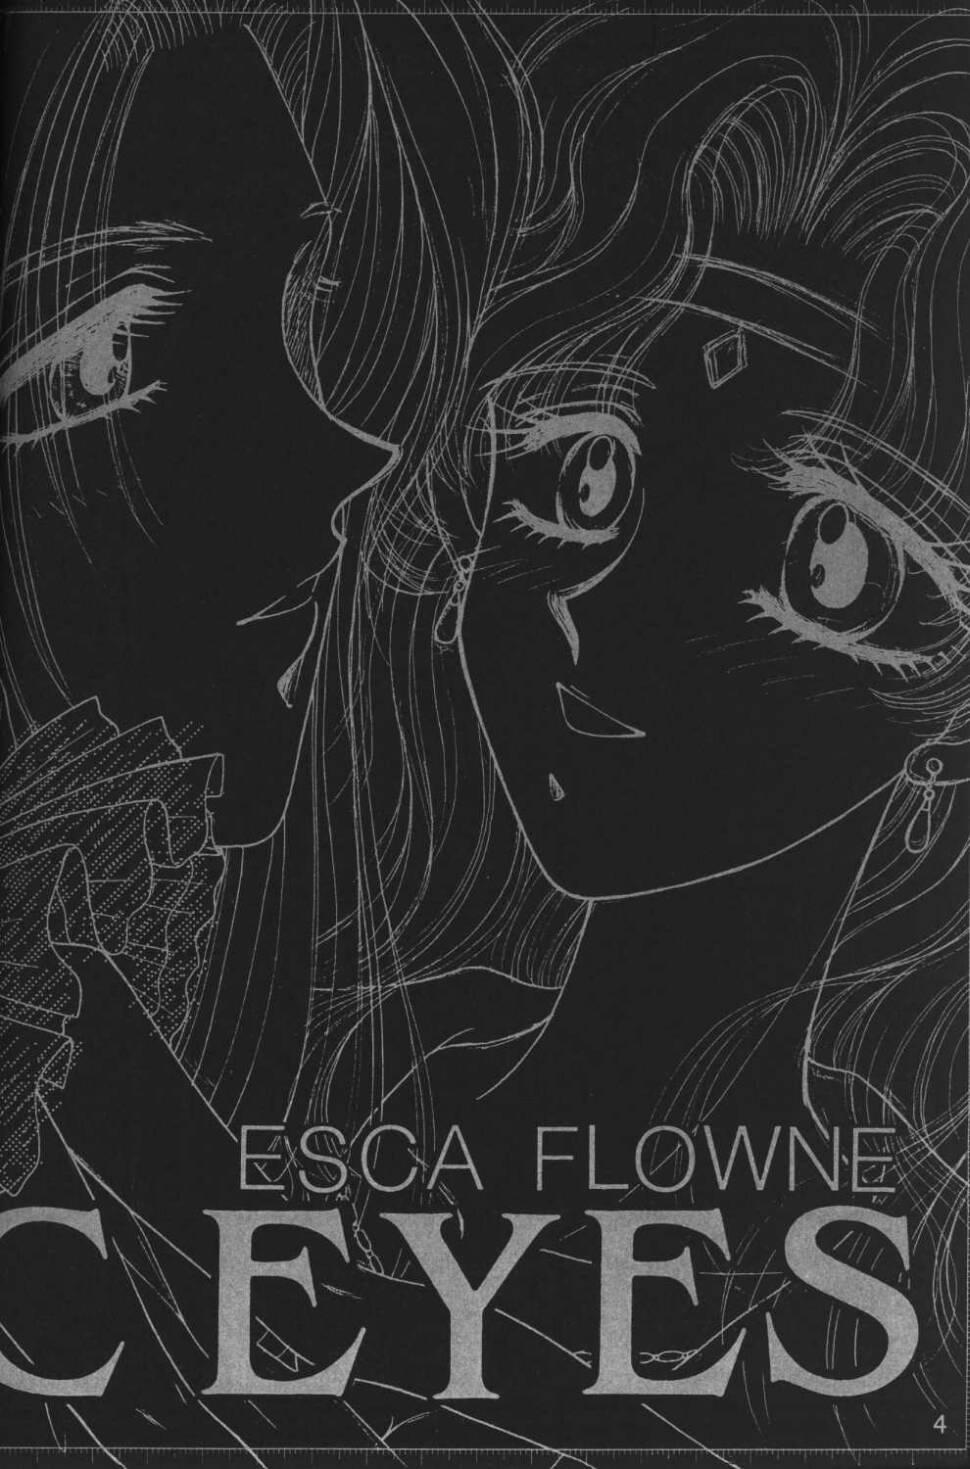 Socks MYSTIC EYES - The vision of escaflowne The - Page 3